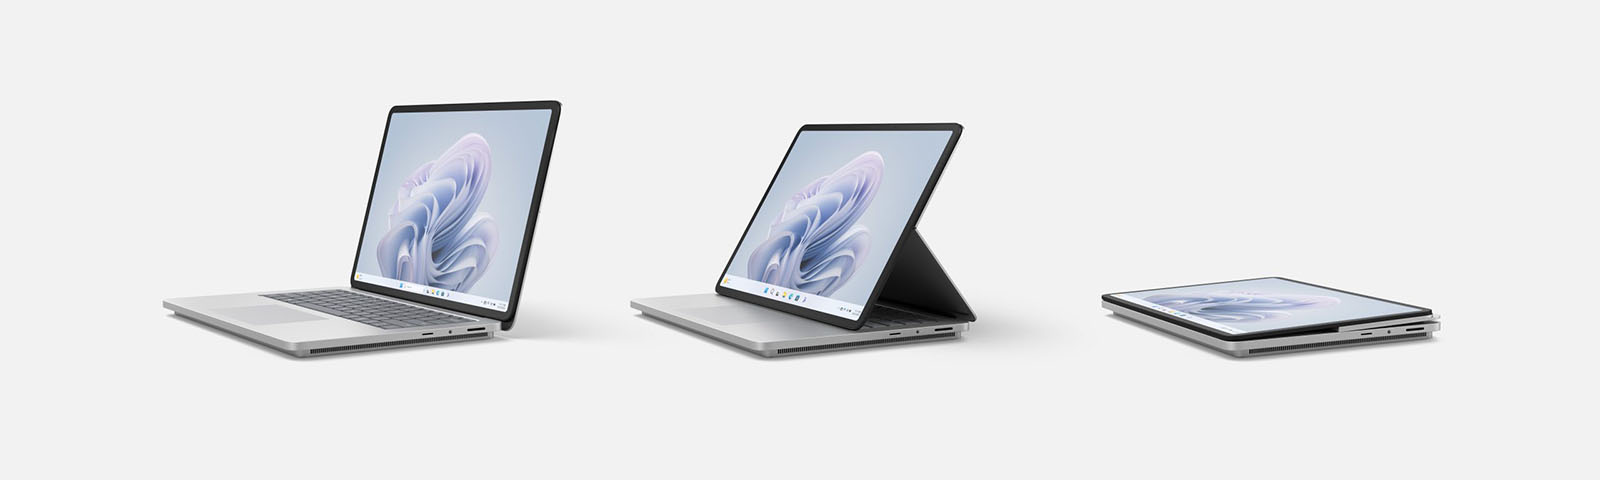 The Microsoft Surface Laptop Studio 2 in various positions as an ordinary laptop, covering the keyboarding leaving only the touchpad exposed, and folding into a tablet,